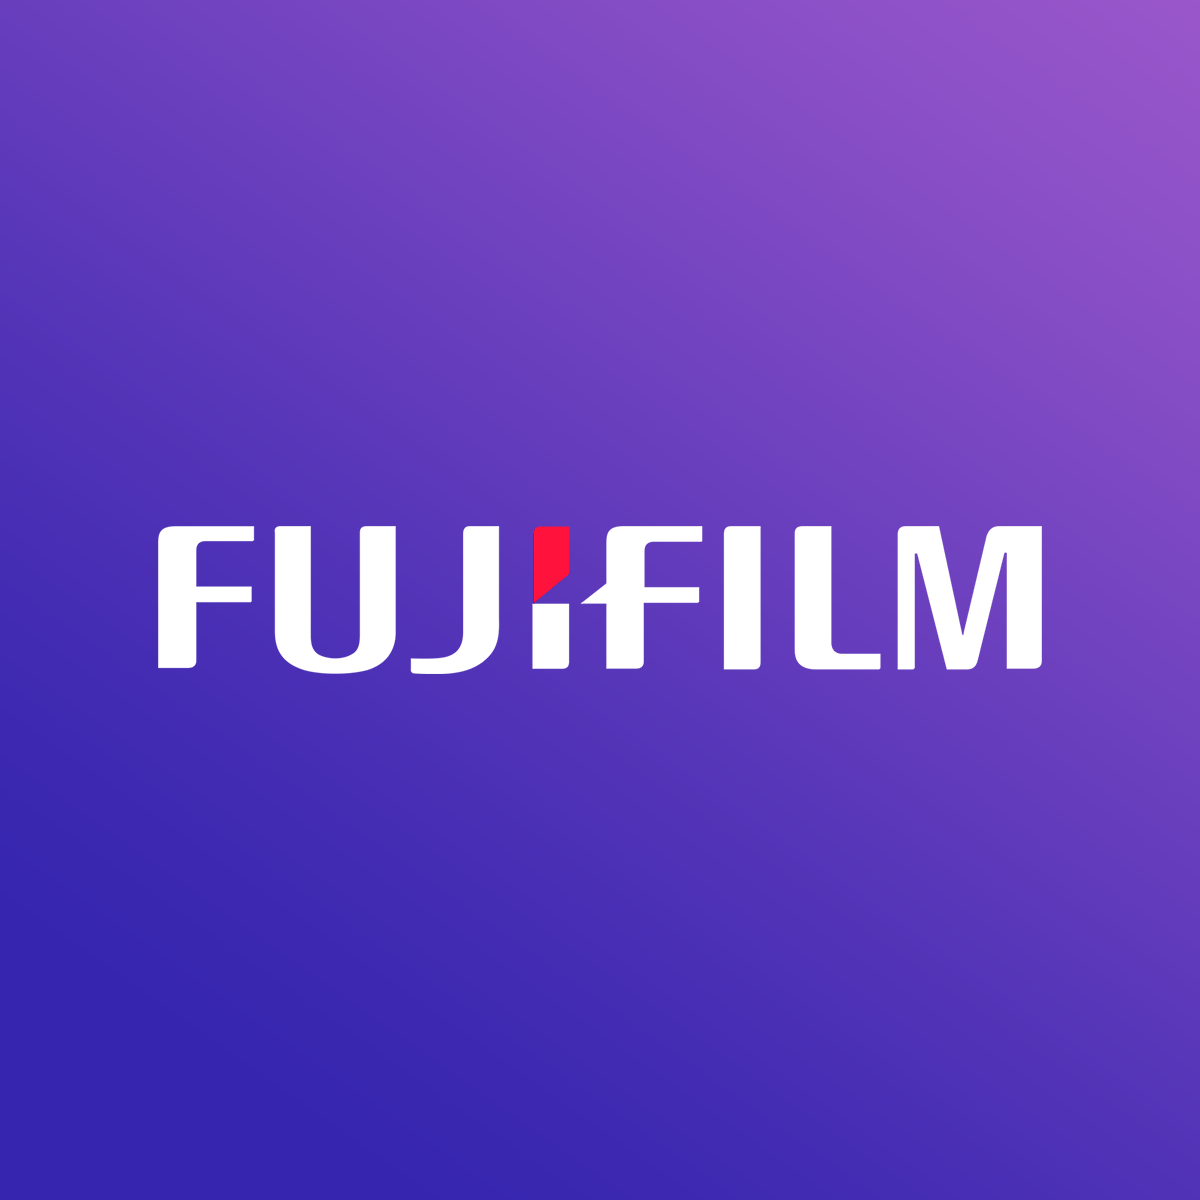 Hire Shopify Experts to integrate FUJIFILM: Print on Demand app into a Shopify store